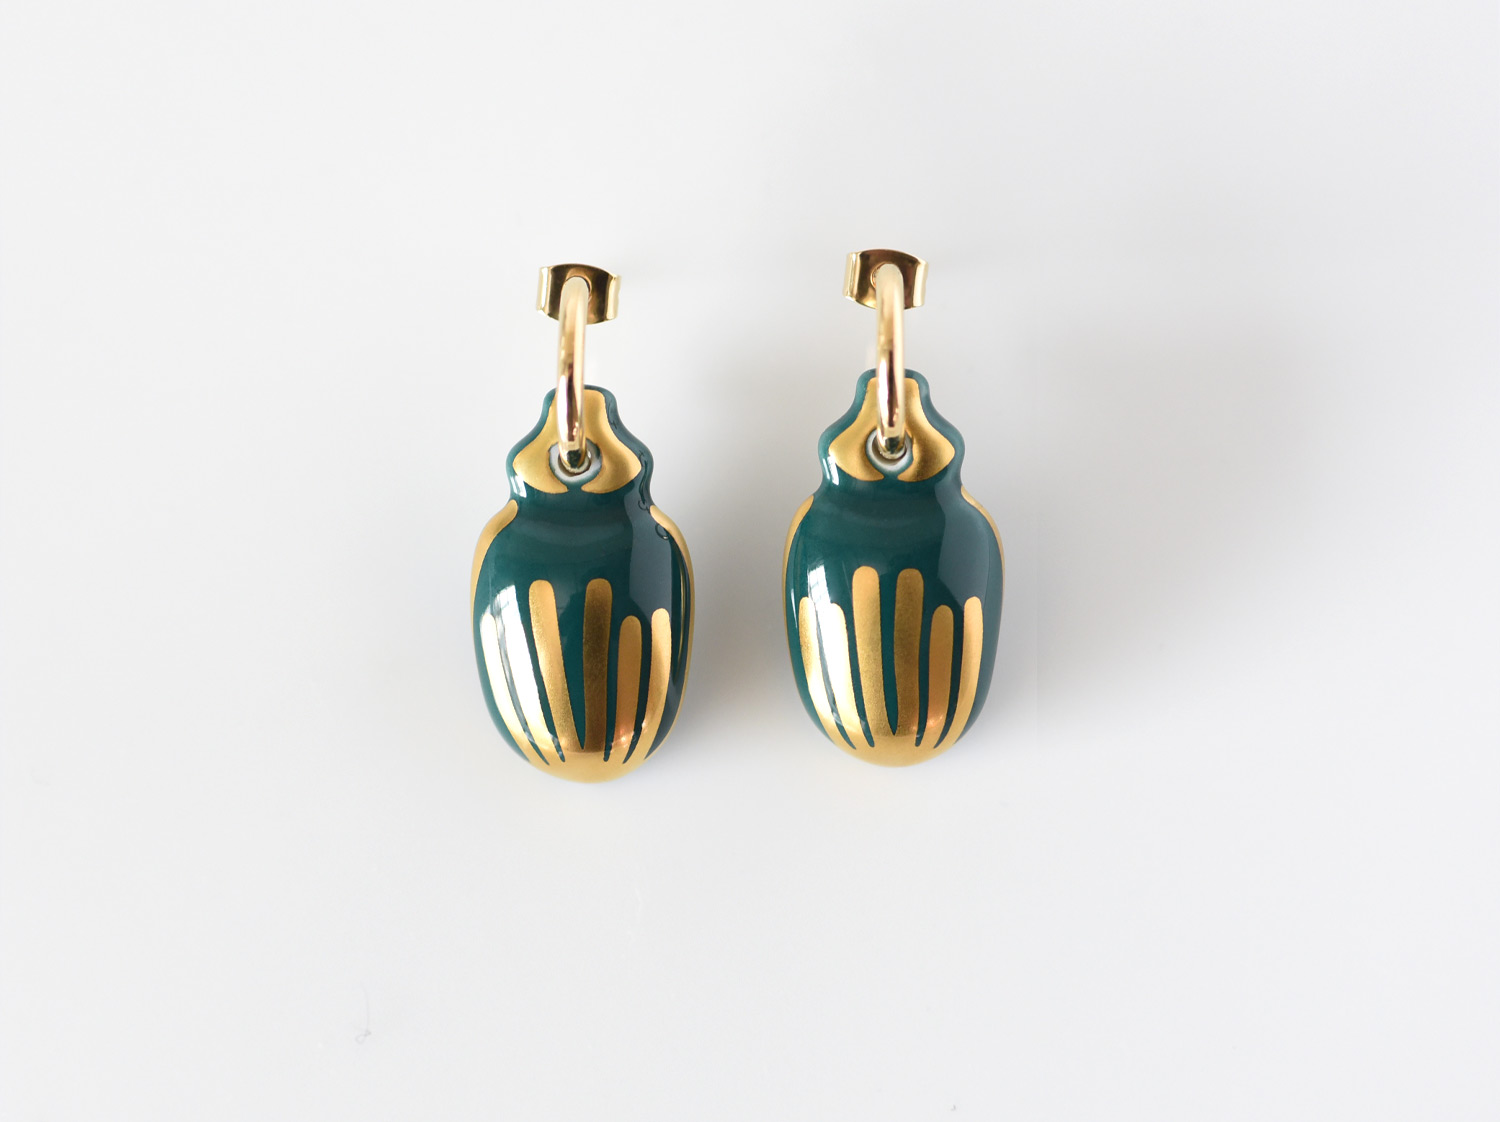 China Scarabée Earrings Green & Gold of the collection SCARABEE VERT OR | Bernardaud